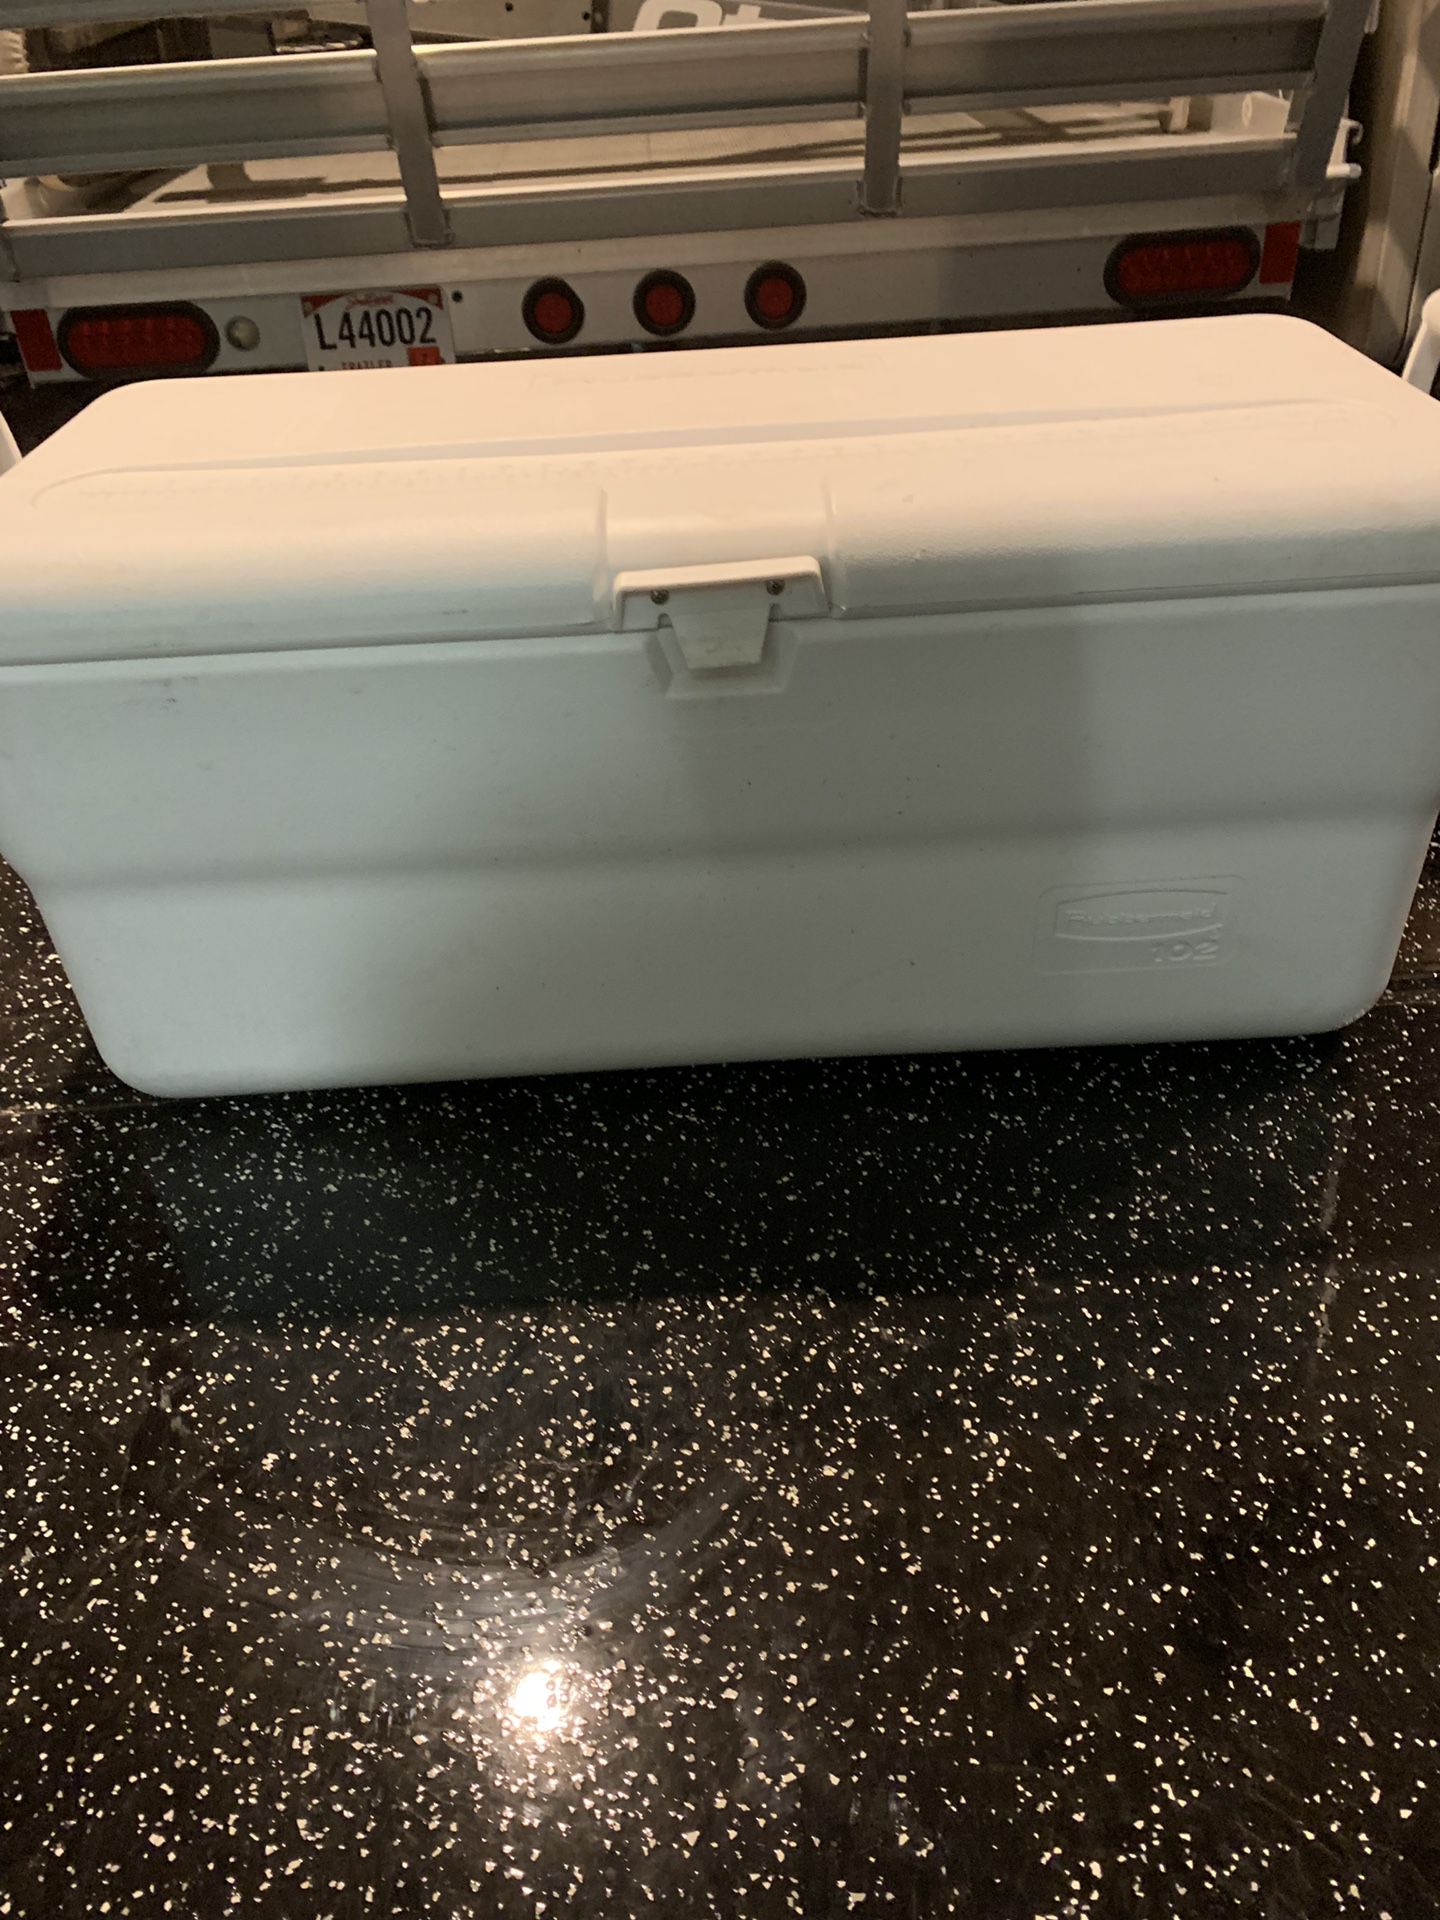 Rubbermaid Ice Cooler